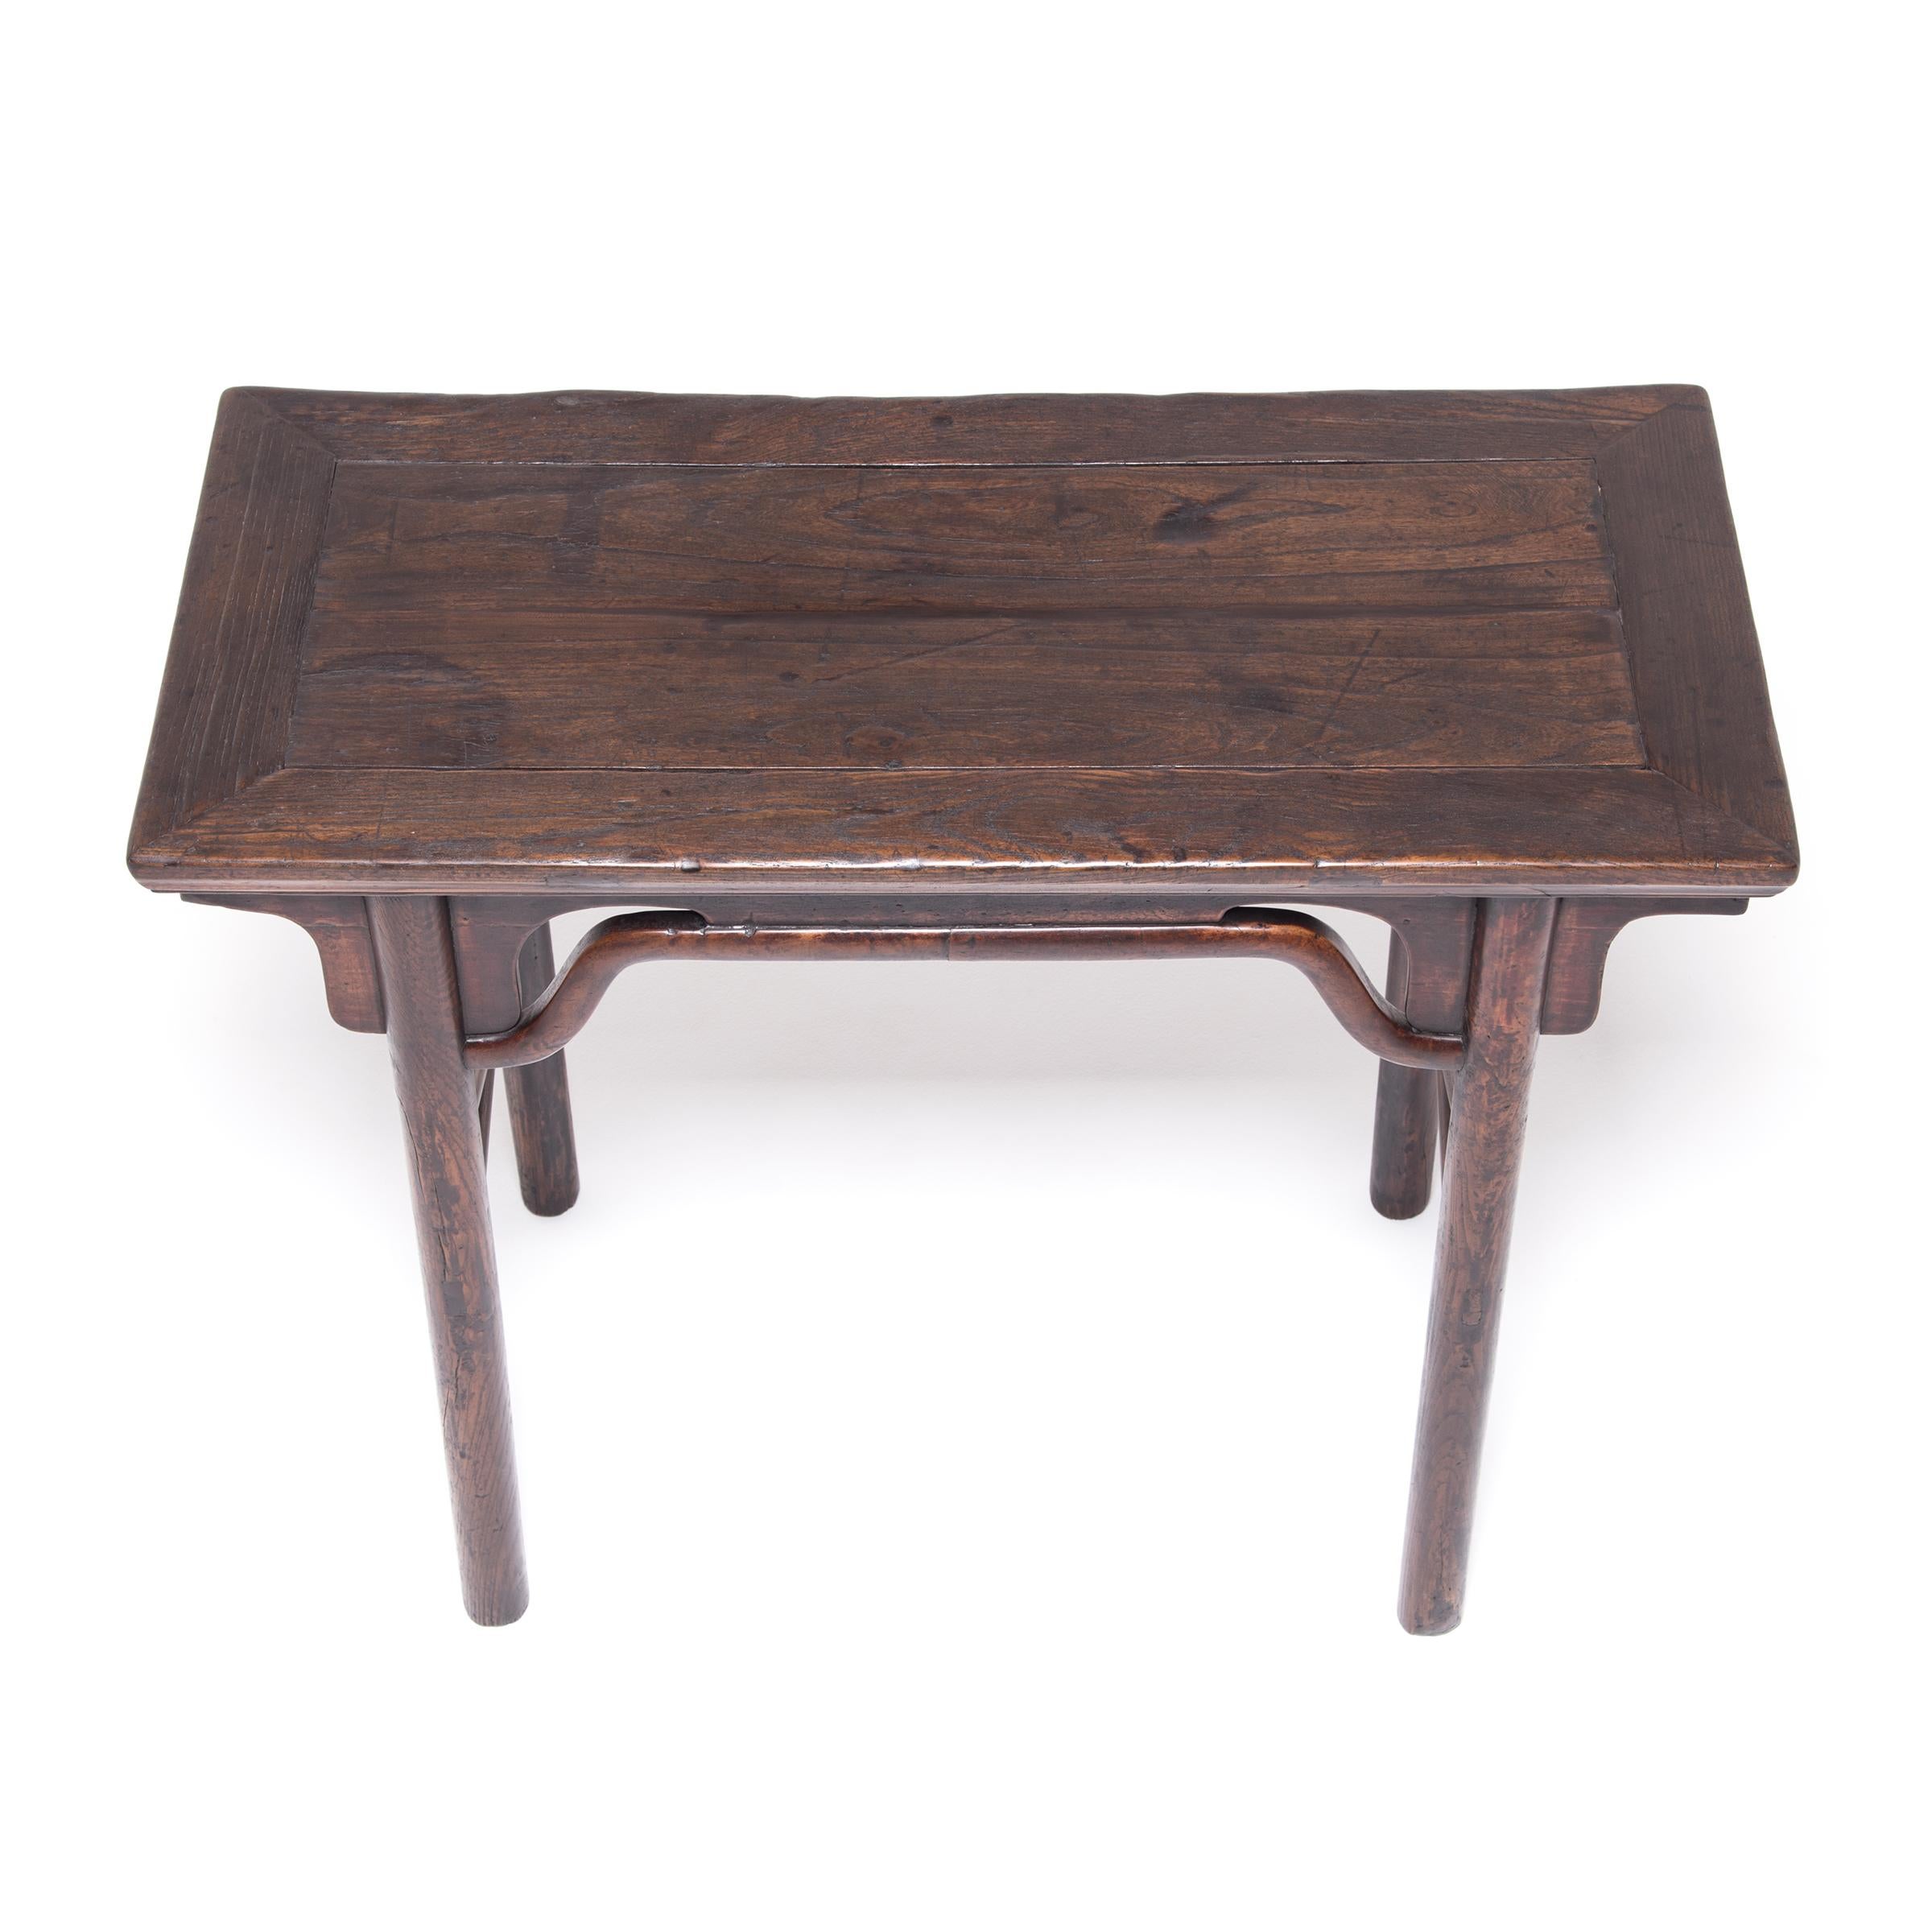 19th Century Chinese Wine Table with Crossed Stretchers, c. 1850 For Sale